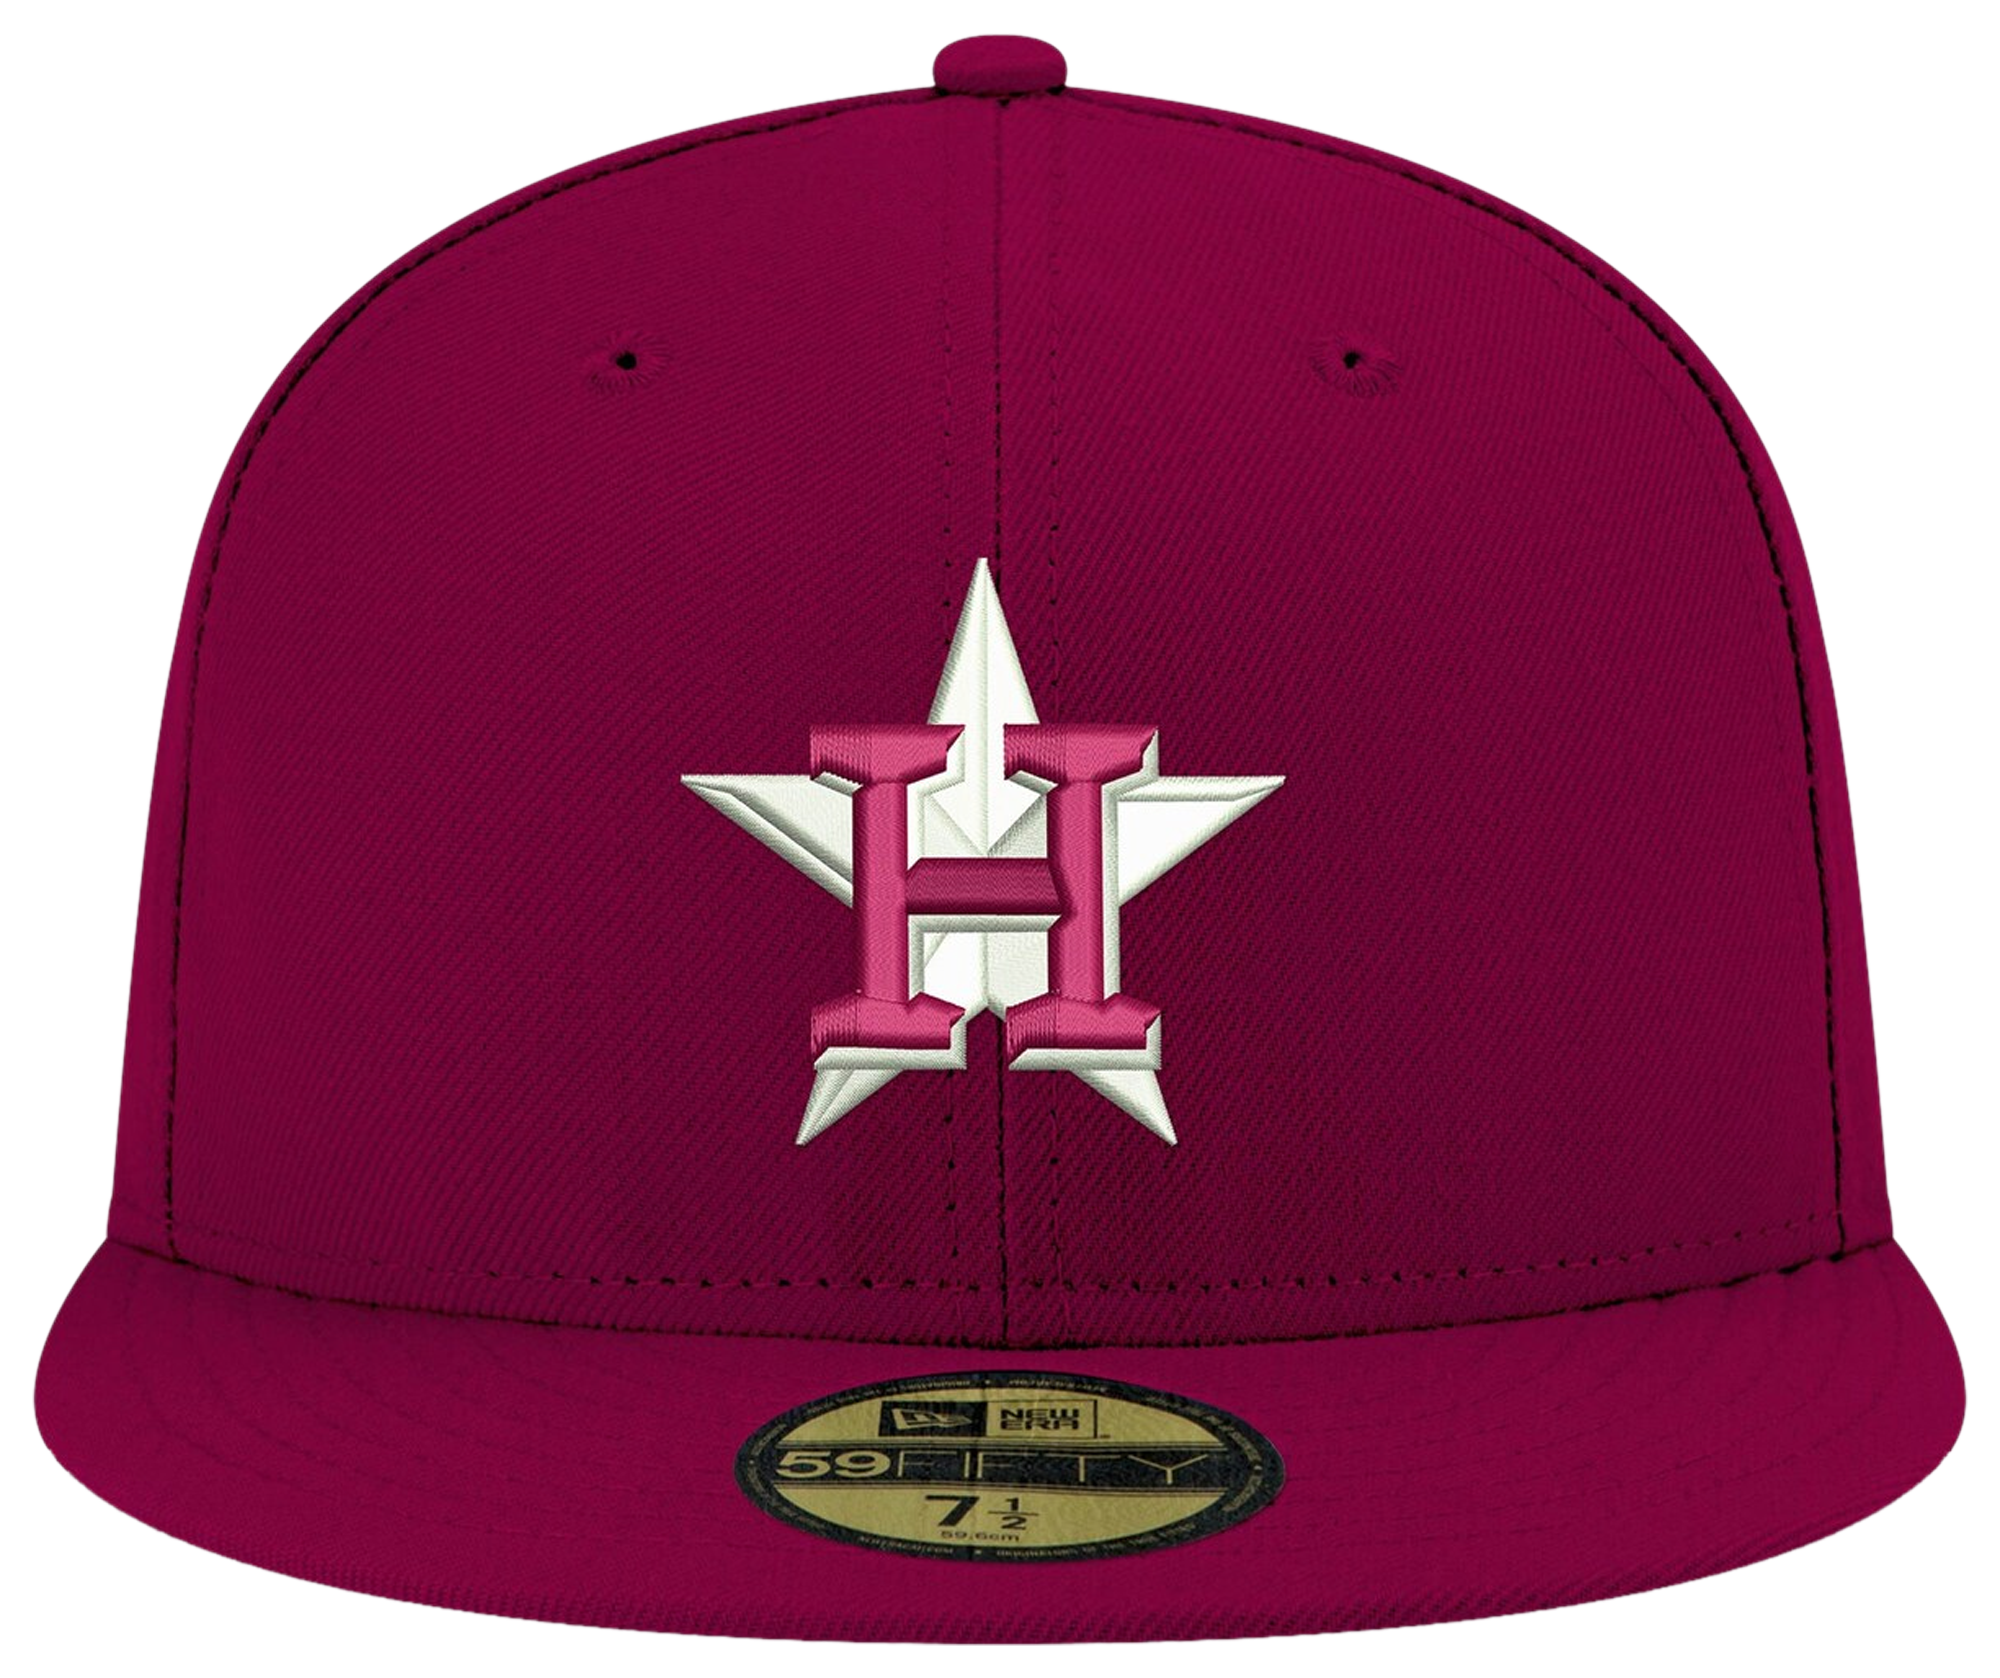 New Era Astros Logo White 59Fifty Fitted Cap